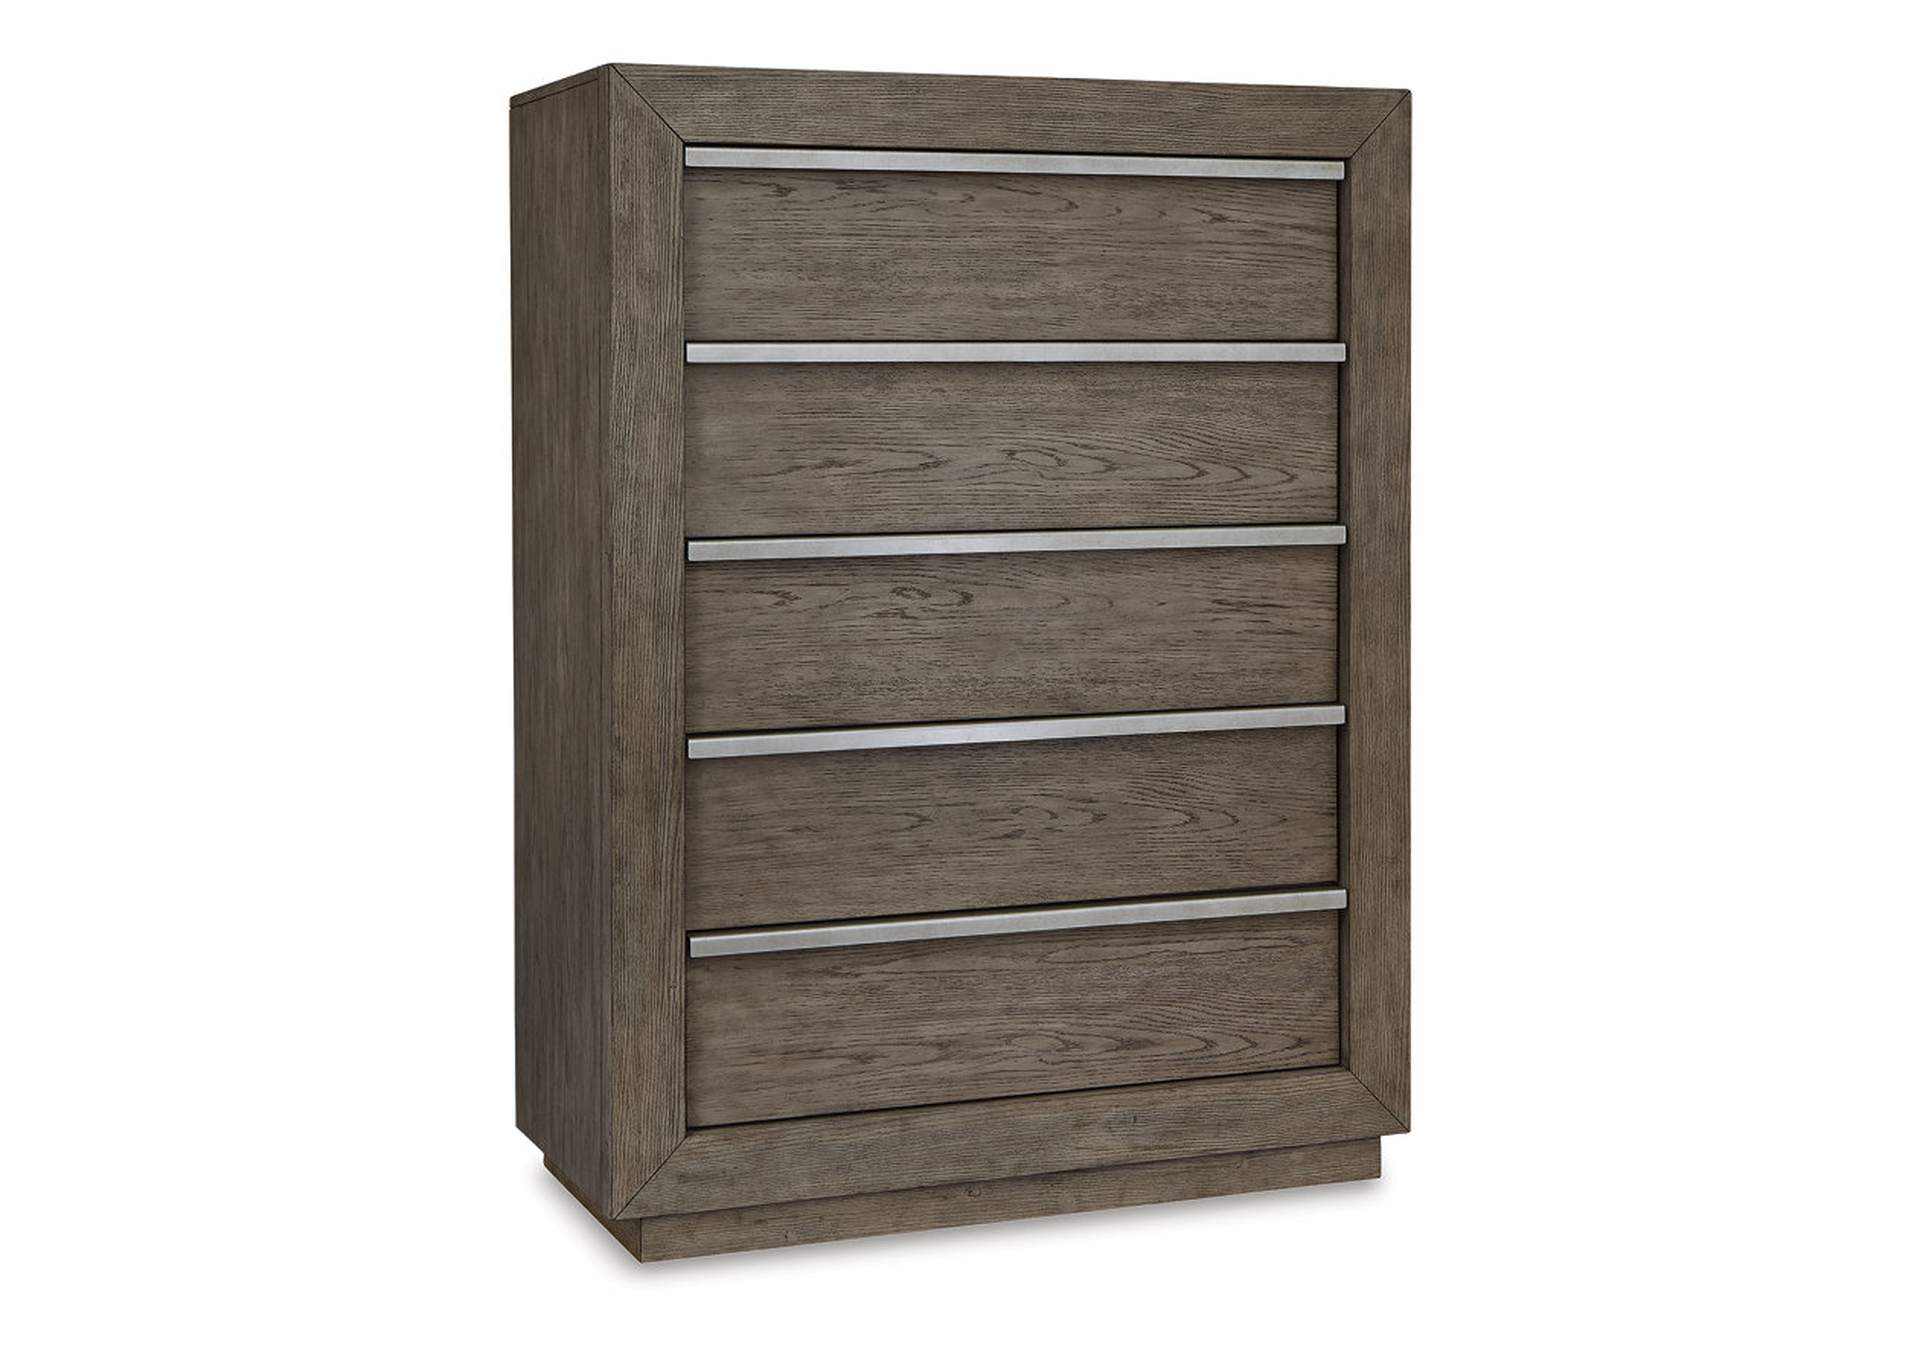 Anibecca Chest of Drawers,Benchcraft